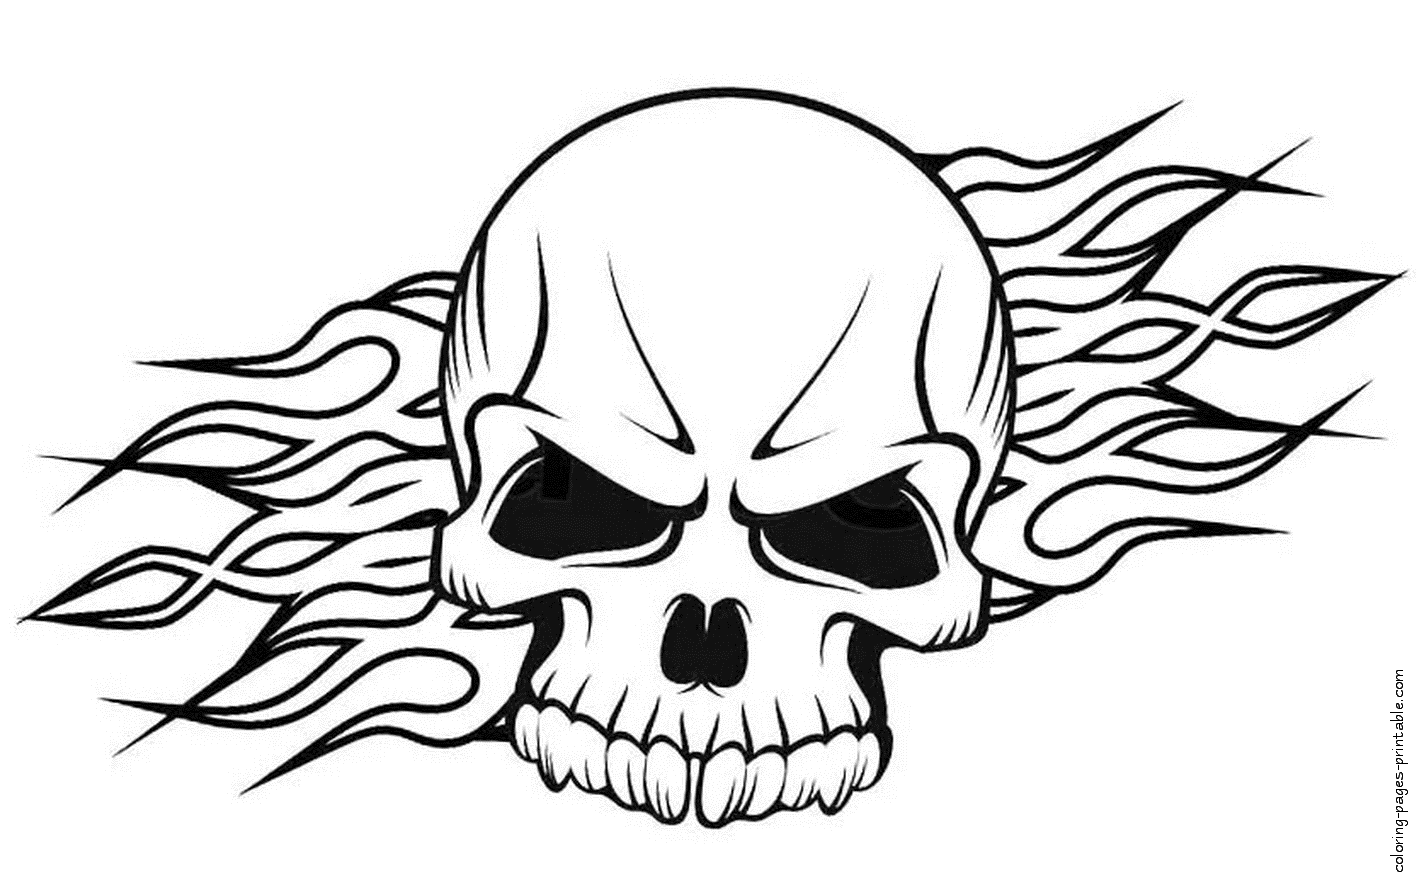 Flamed Skull Coloring Page | Skull art drawing, Skull coloring pages, Skulls  drawing